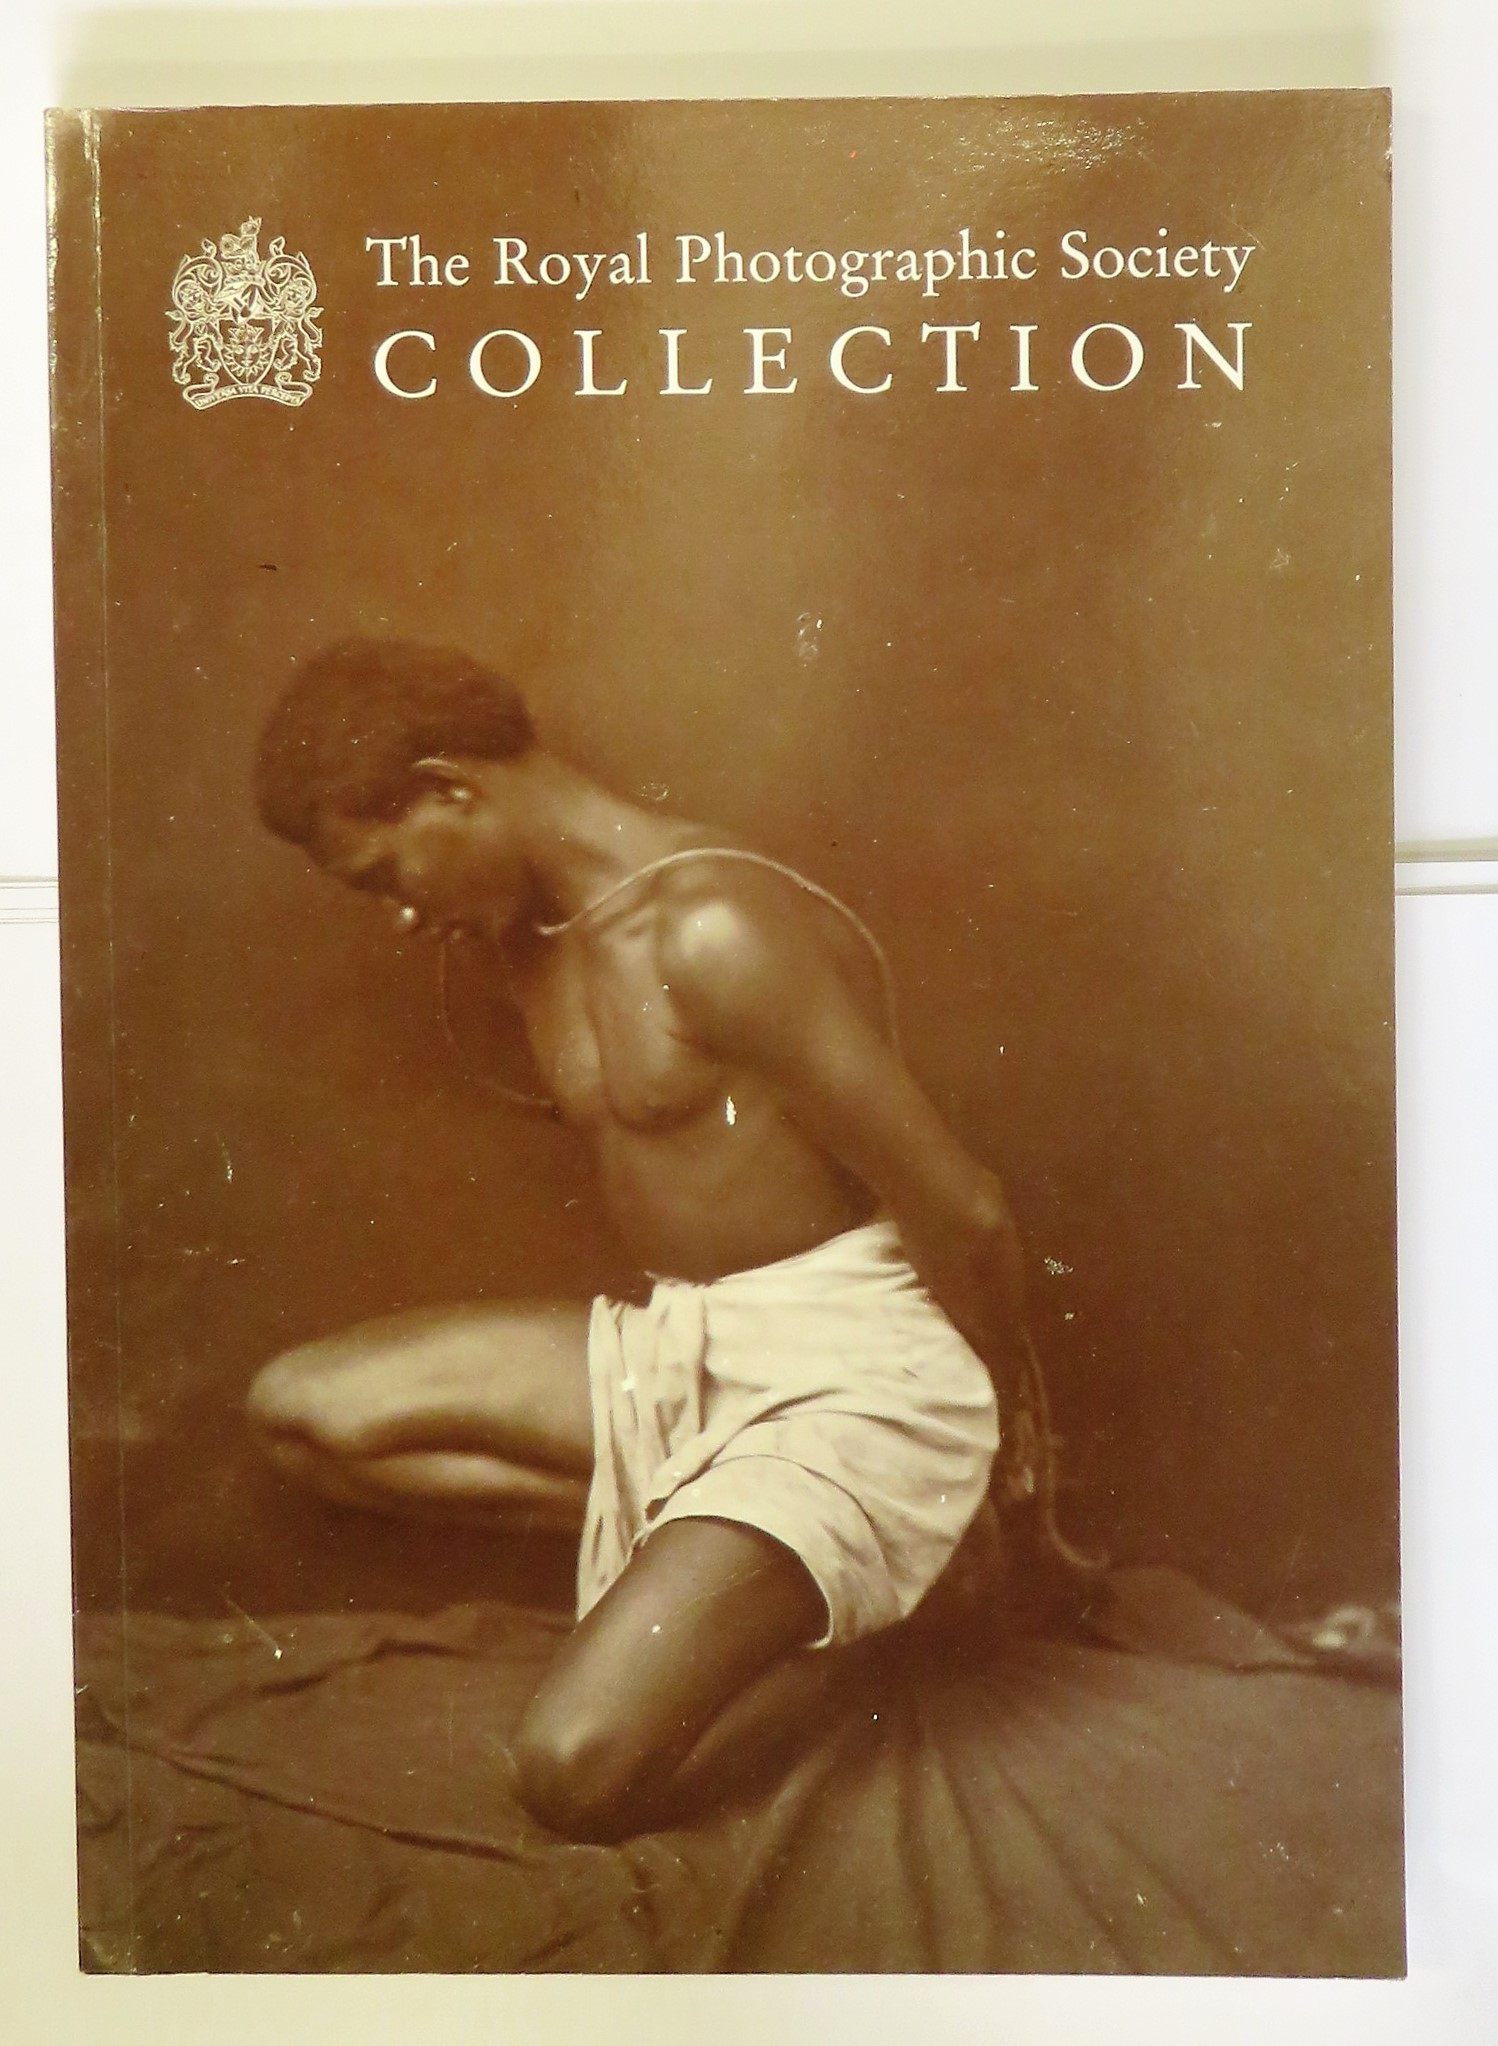 The Royal Photographic Society Collection